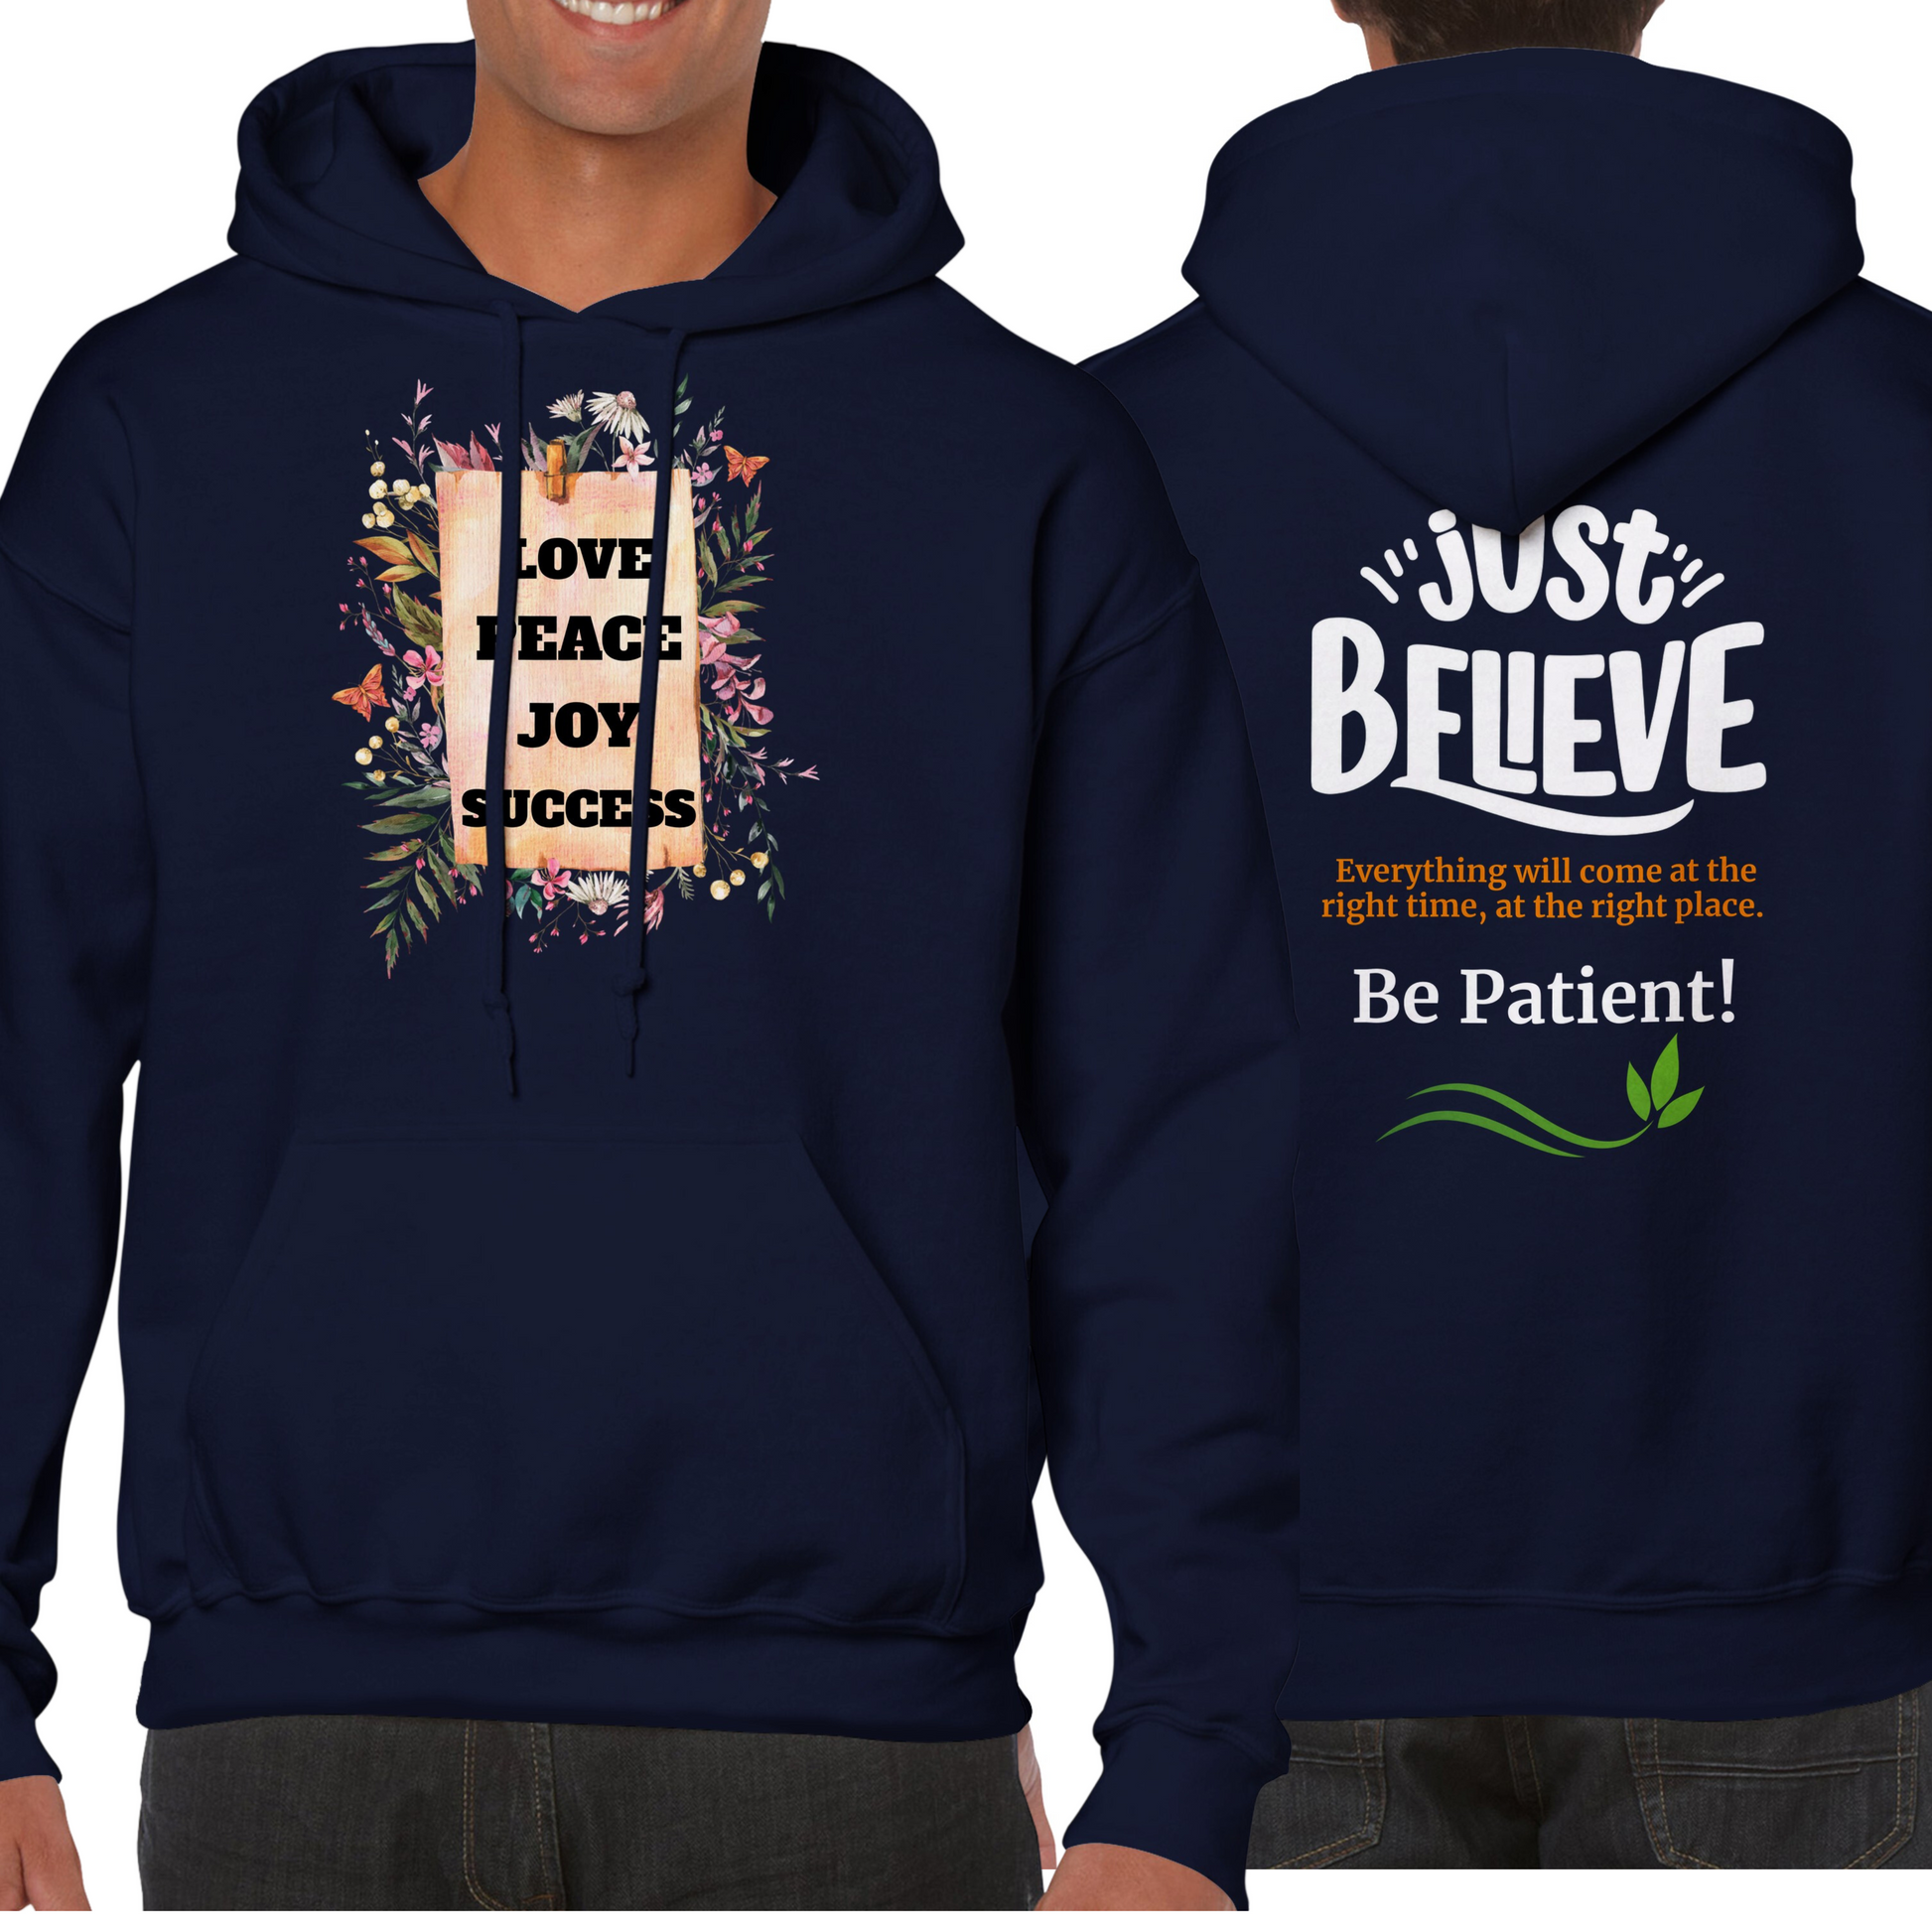 Cottagecore Unisex Hoddie, with positive Words: Love, Peace, Joy and Success. In the back: Just Believe everything will come at the right time and the right place. Be patient!Positive Quote Top, Vintage Jumper Gift Idea - navy hoodie